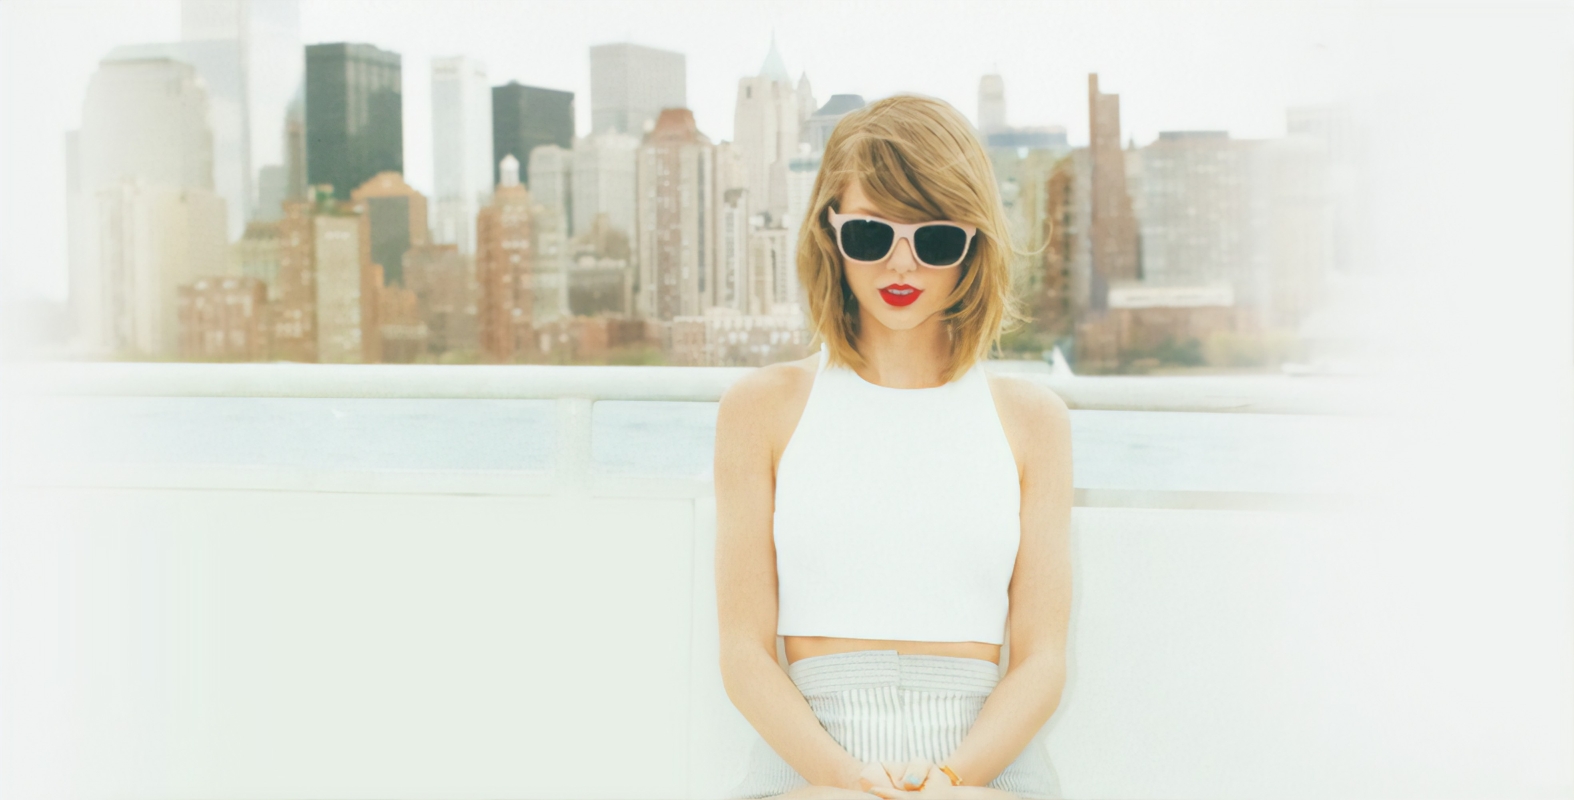 People 1574x800 Taylor Swift women blonde red lipstick women with shades white blouse shoulder length hair singer city